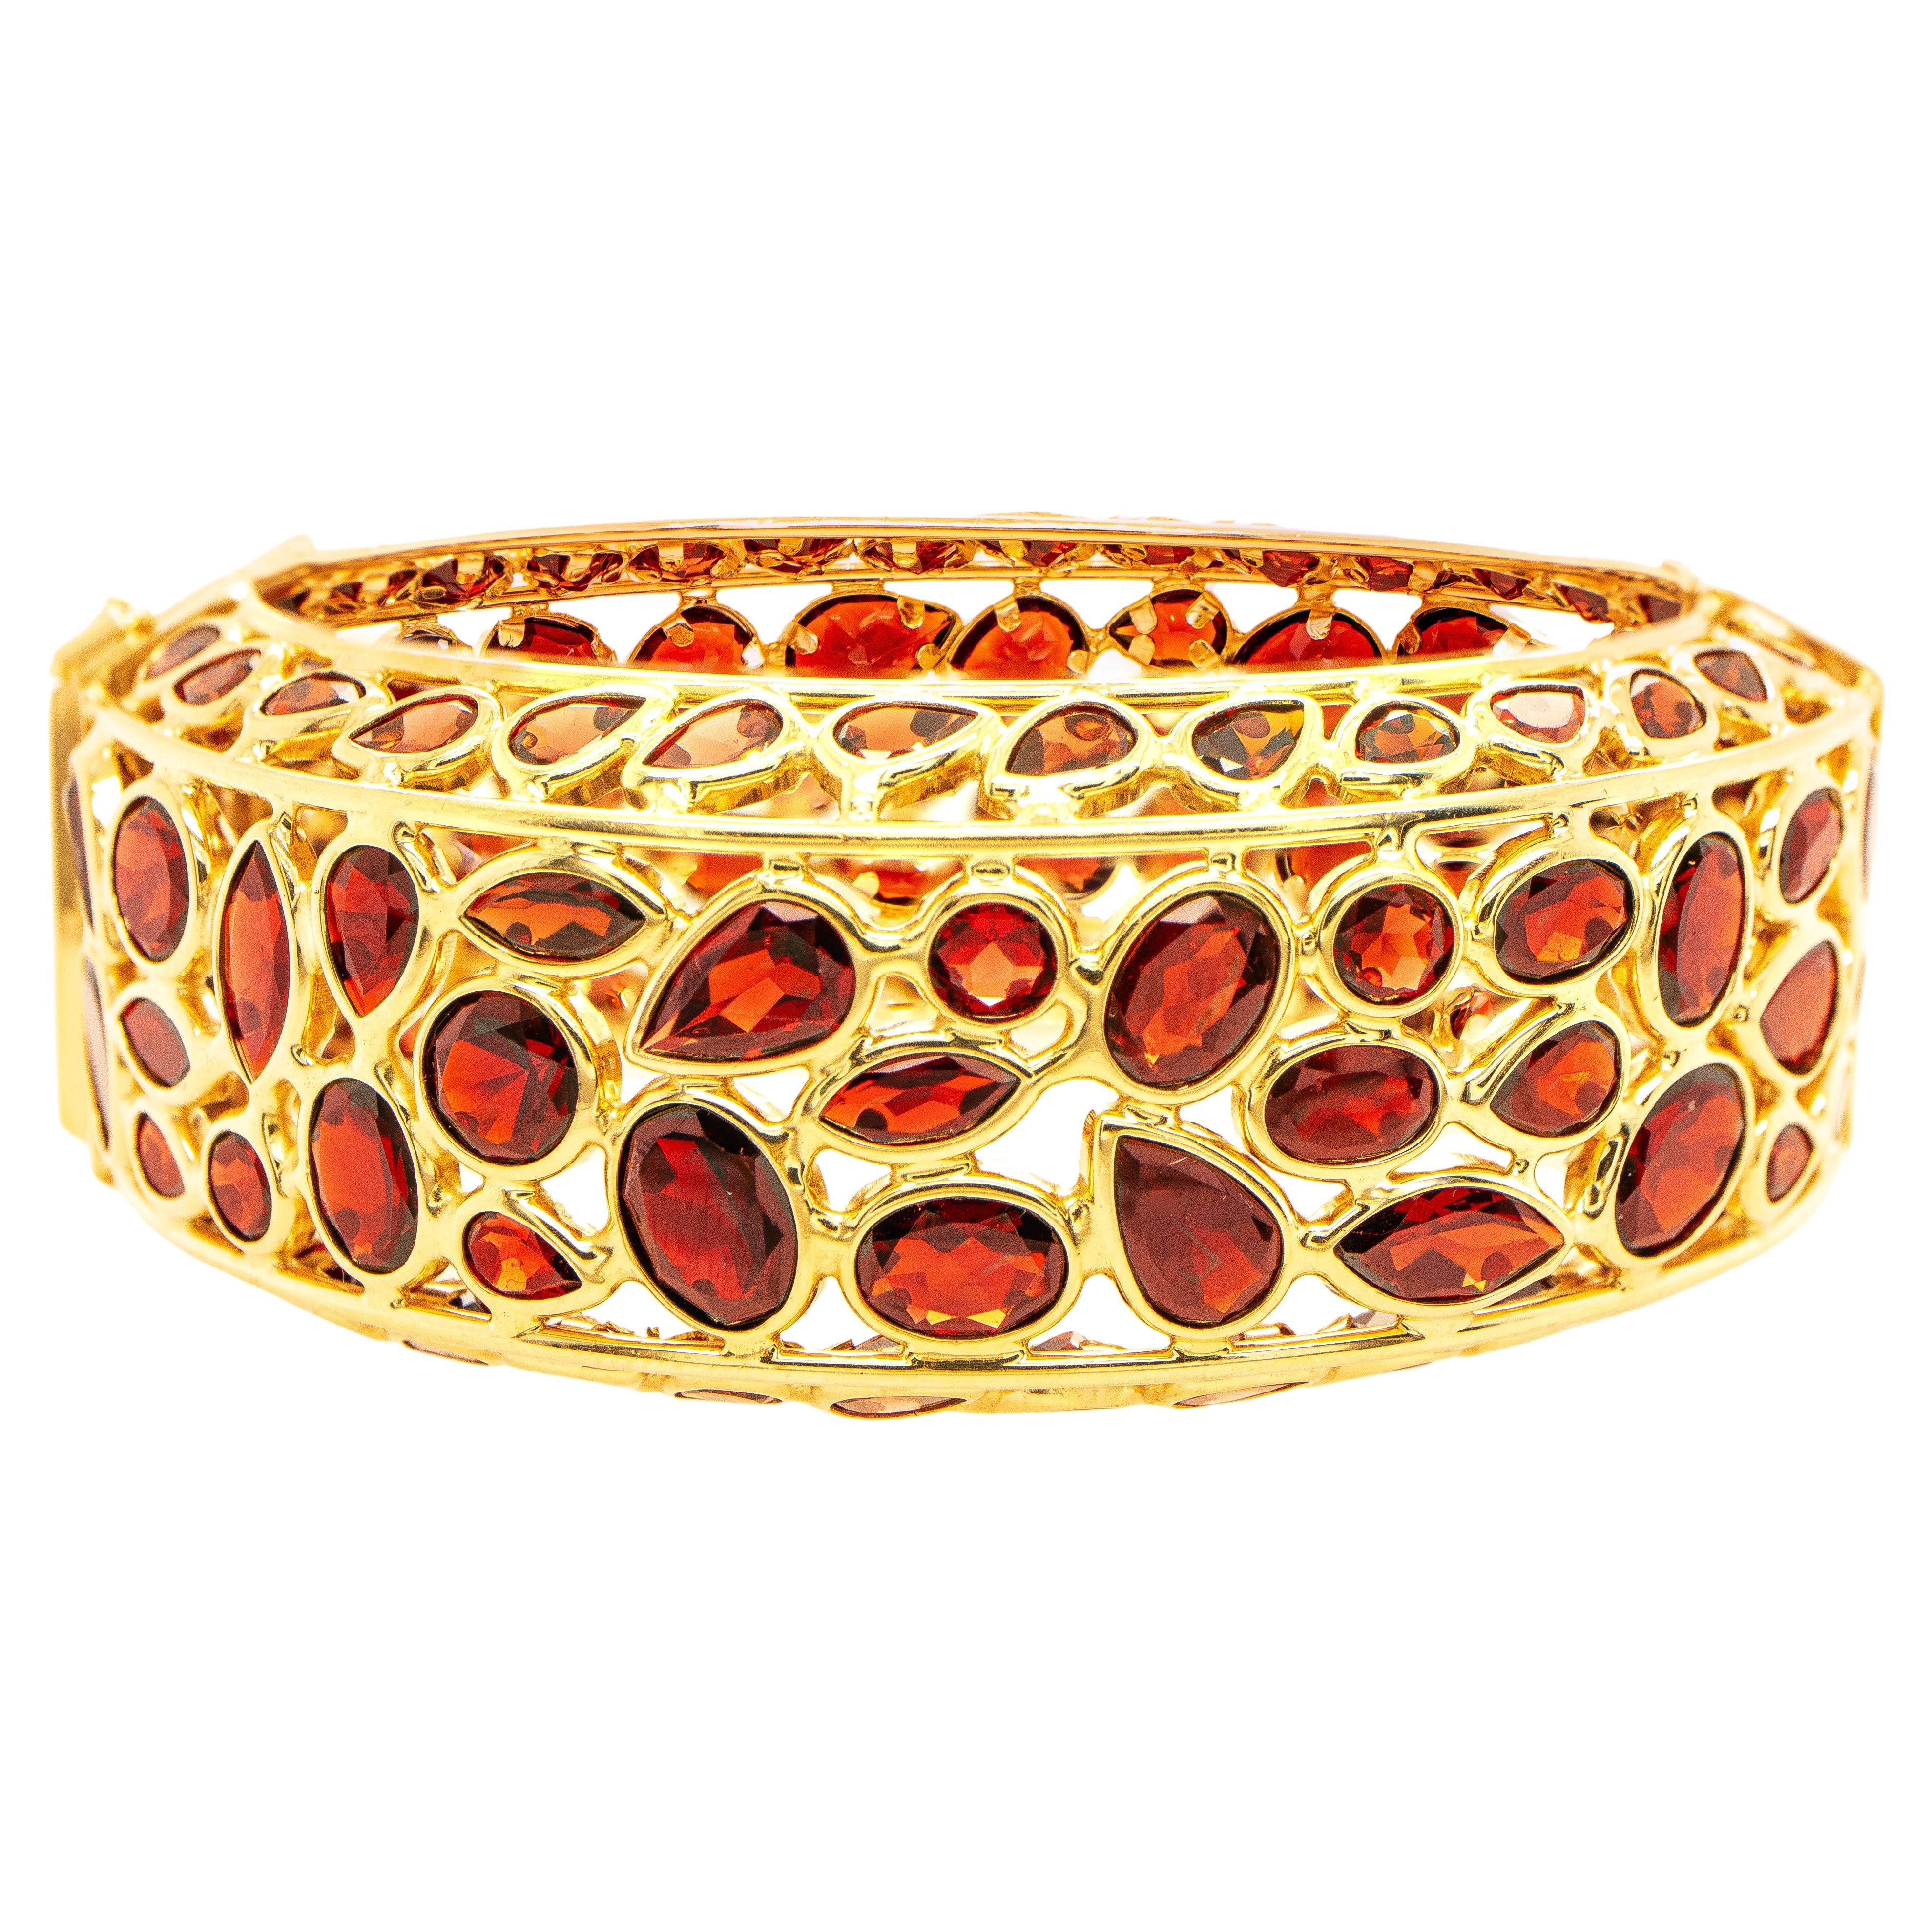 Important Cougar Bangle Bracelet Red Garnets 100 Carats 14K Yellow Gold For Sale